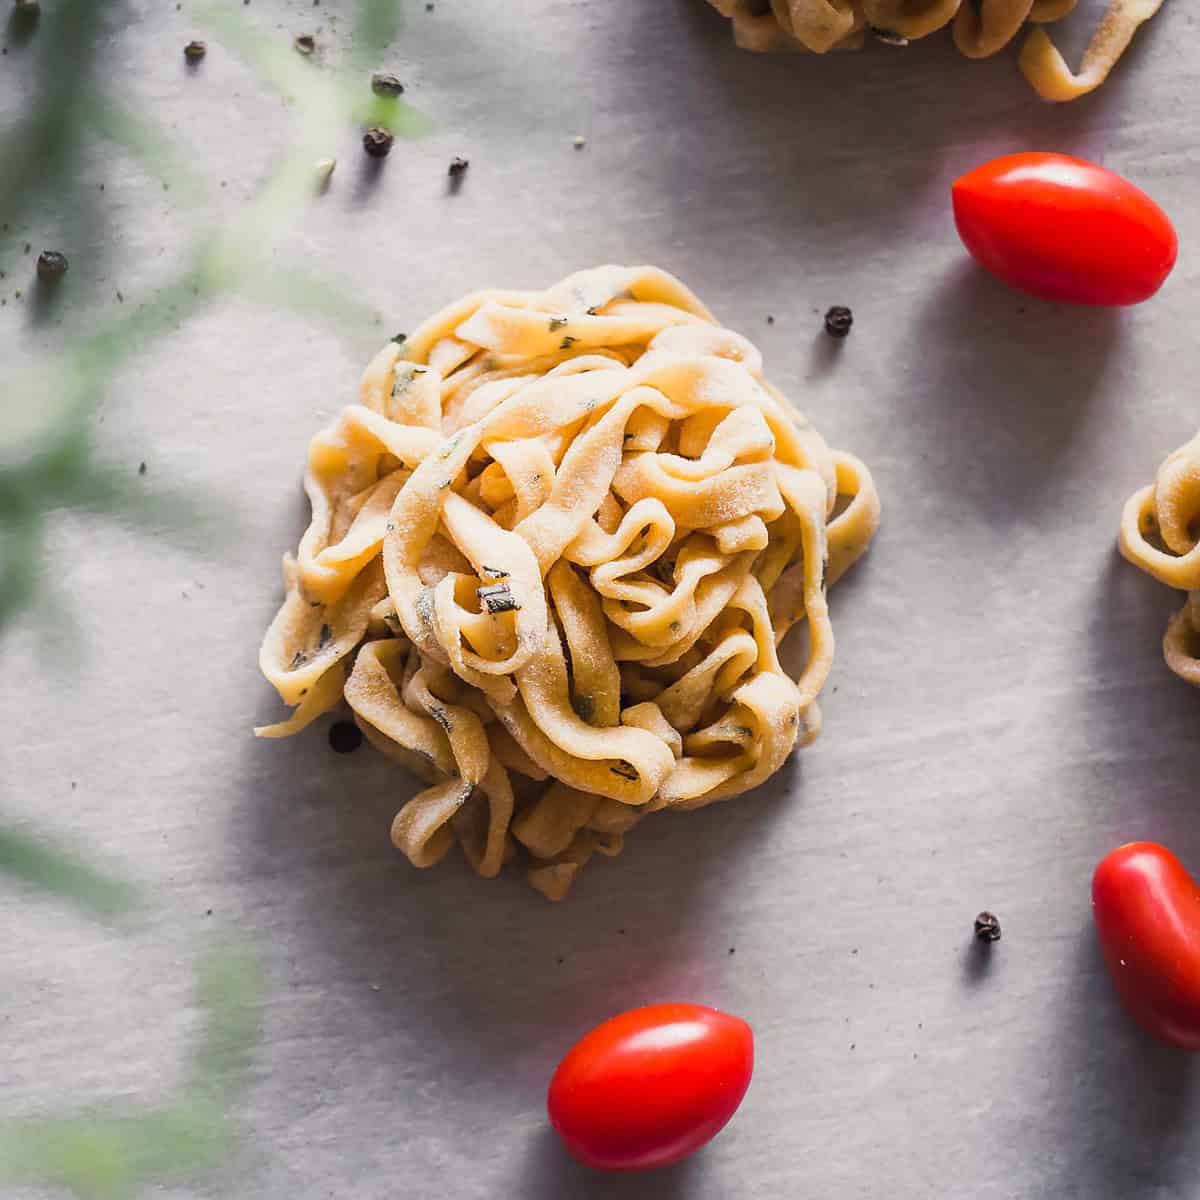 Homemade Pasta with Rosemary and Tomato